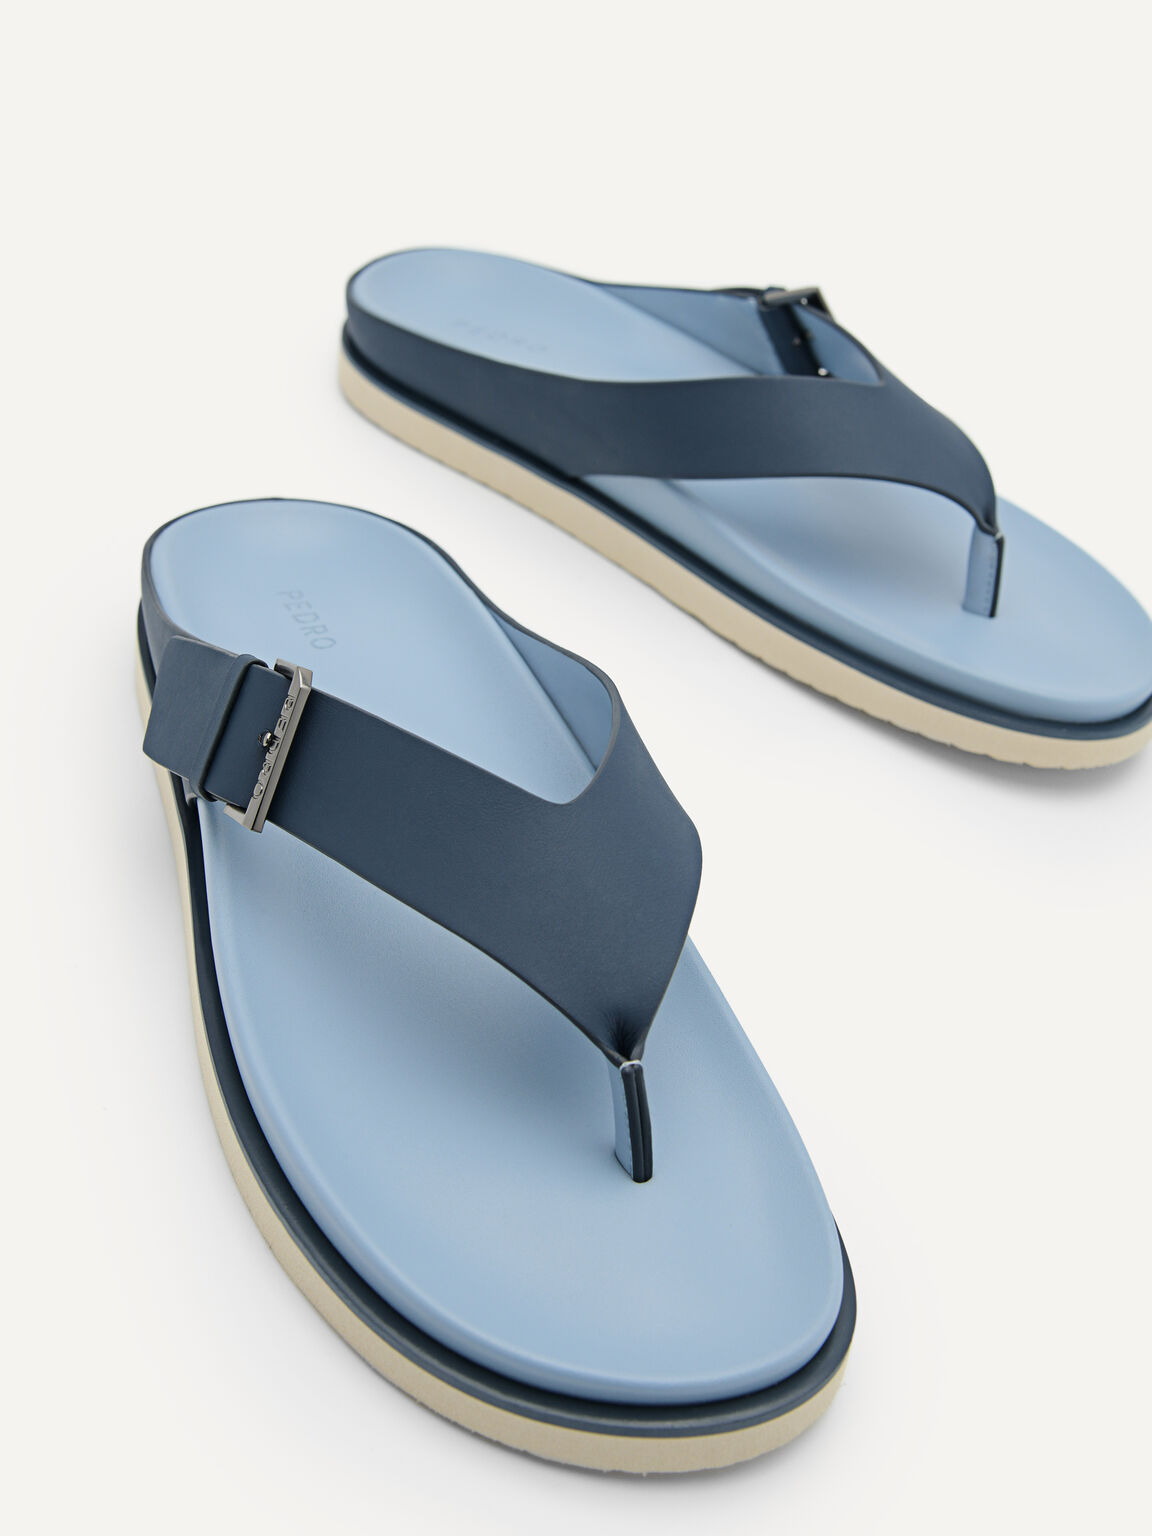 Buckle Thong Sandals, Navy